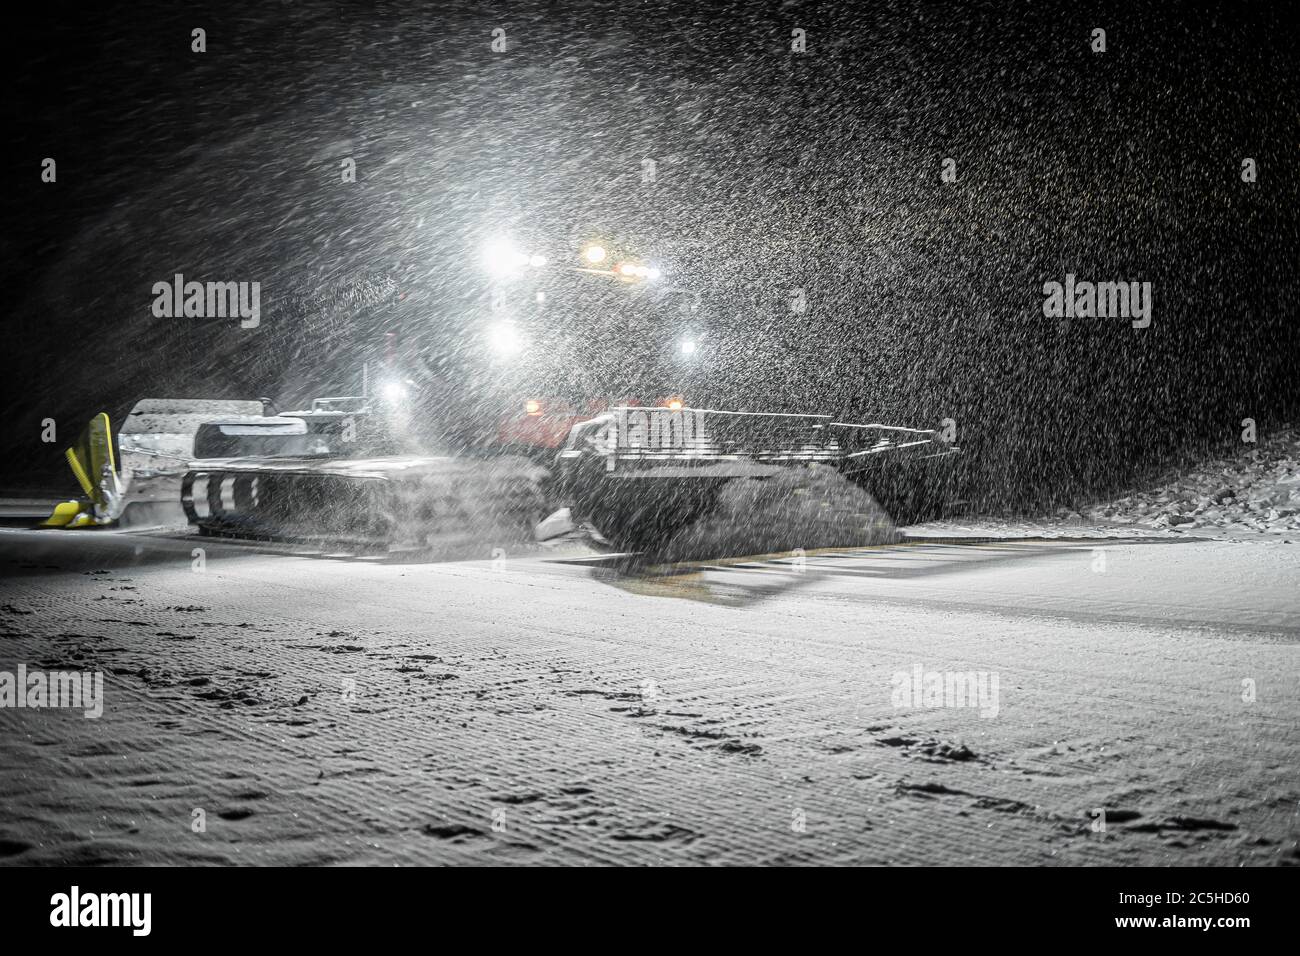 Snowcat with front lights preparing a slope at night in mountains at skiing resort with the snowfall Stock Photo